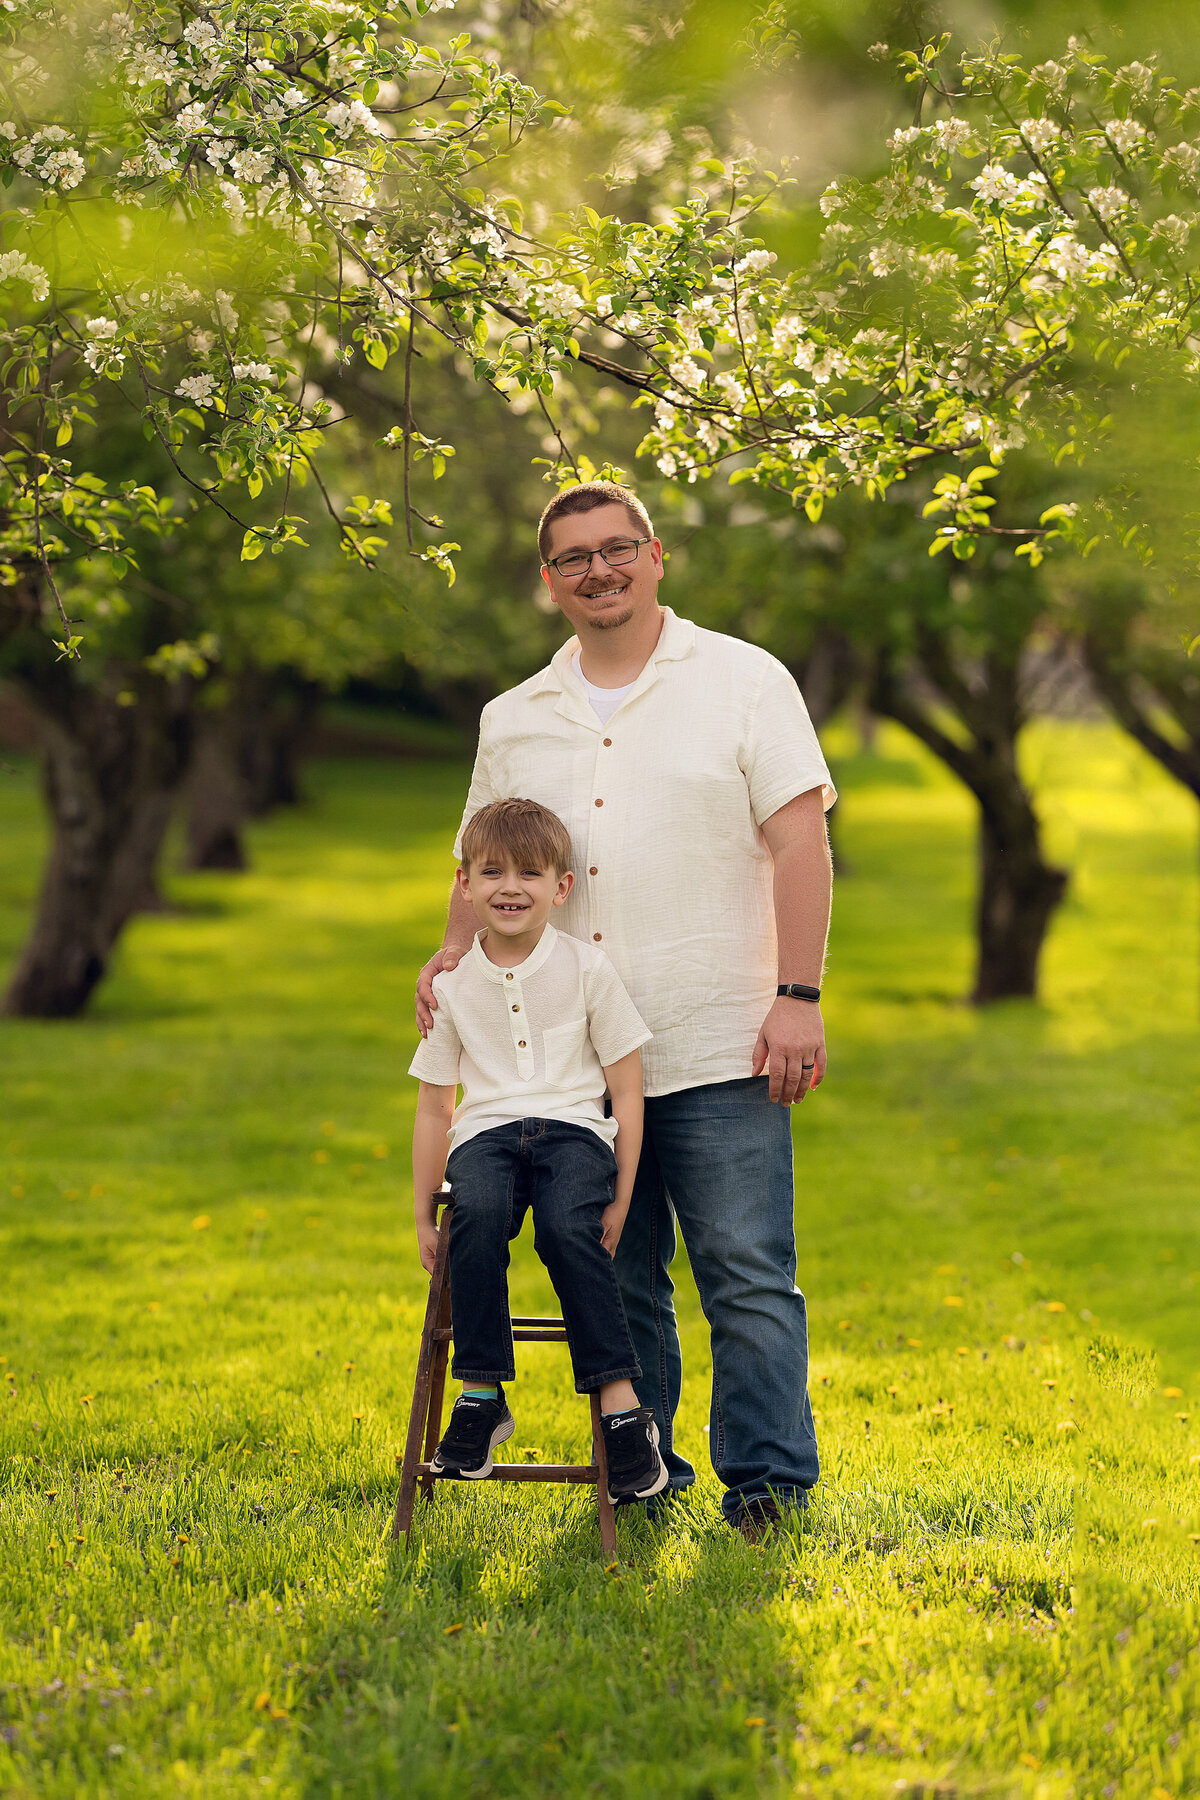 A father poses with his son in a Waukesha, WI orchard.